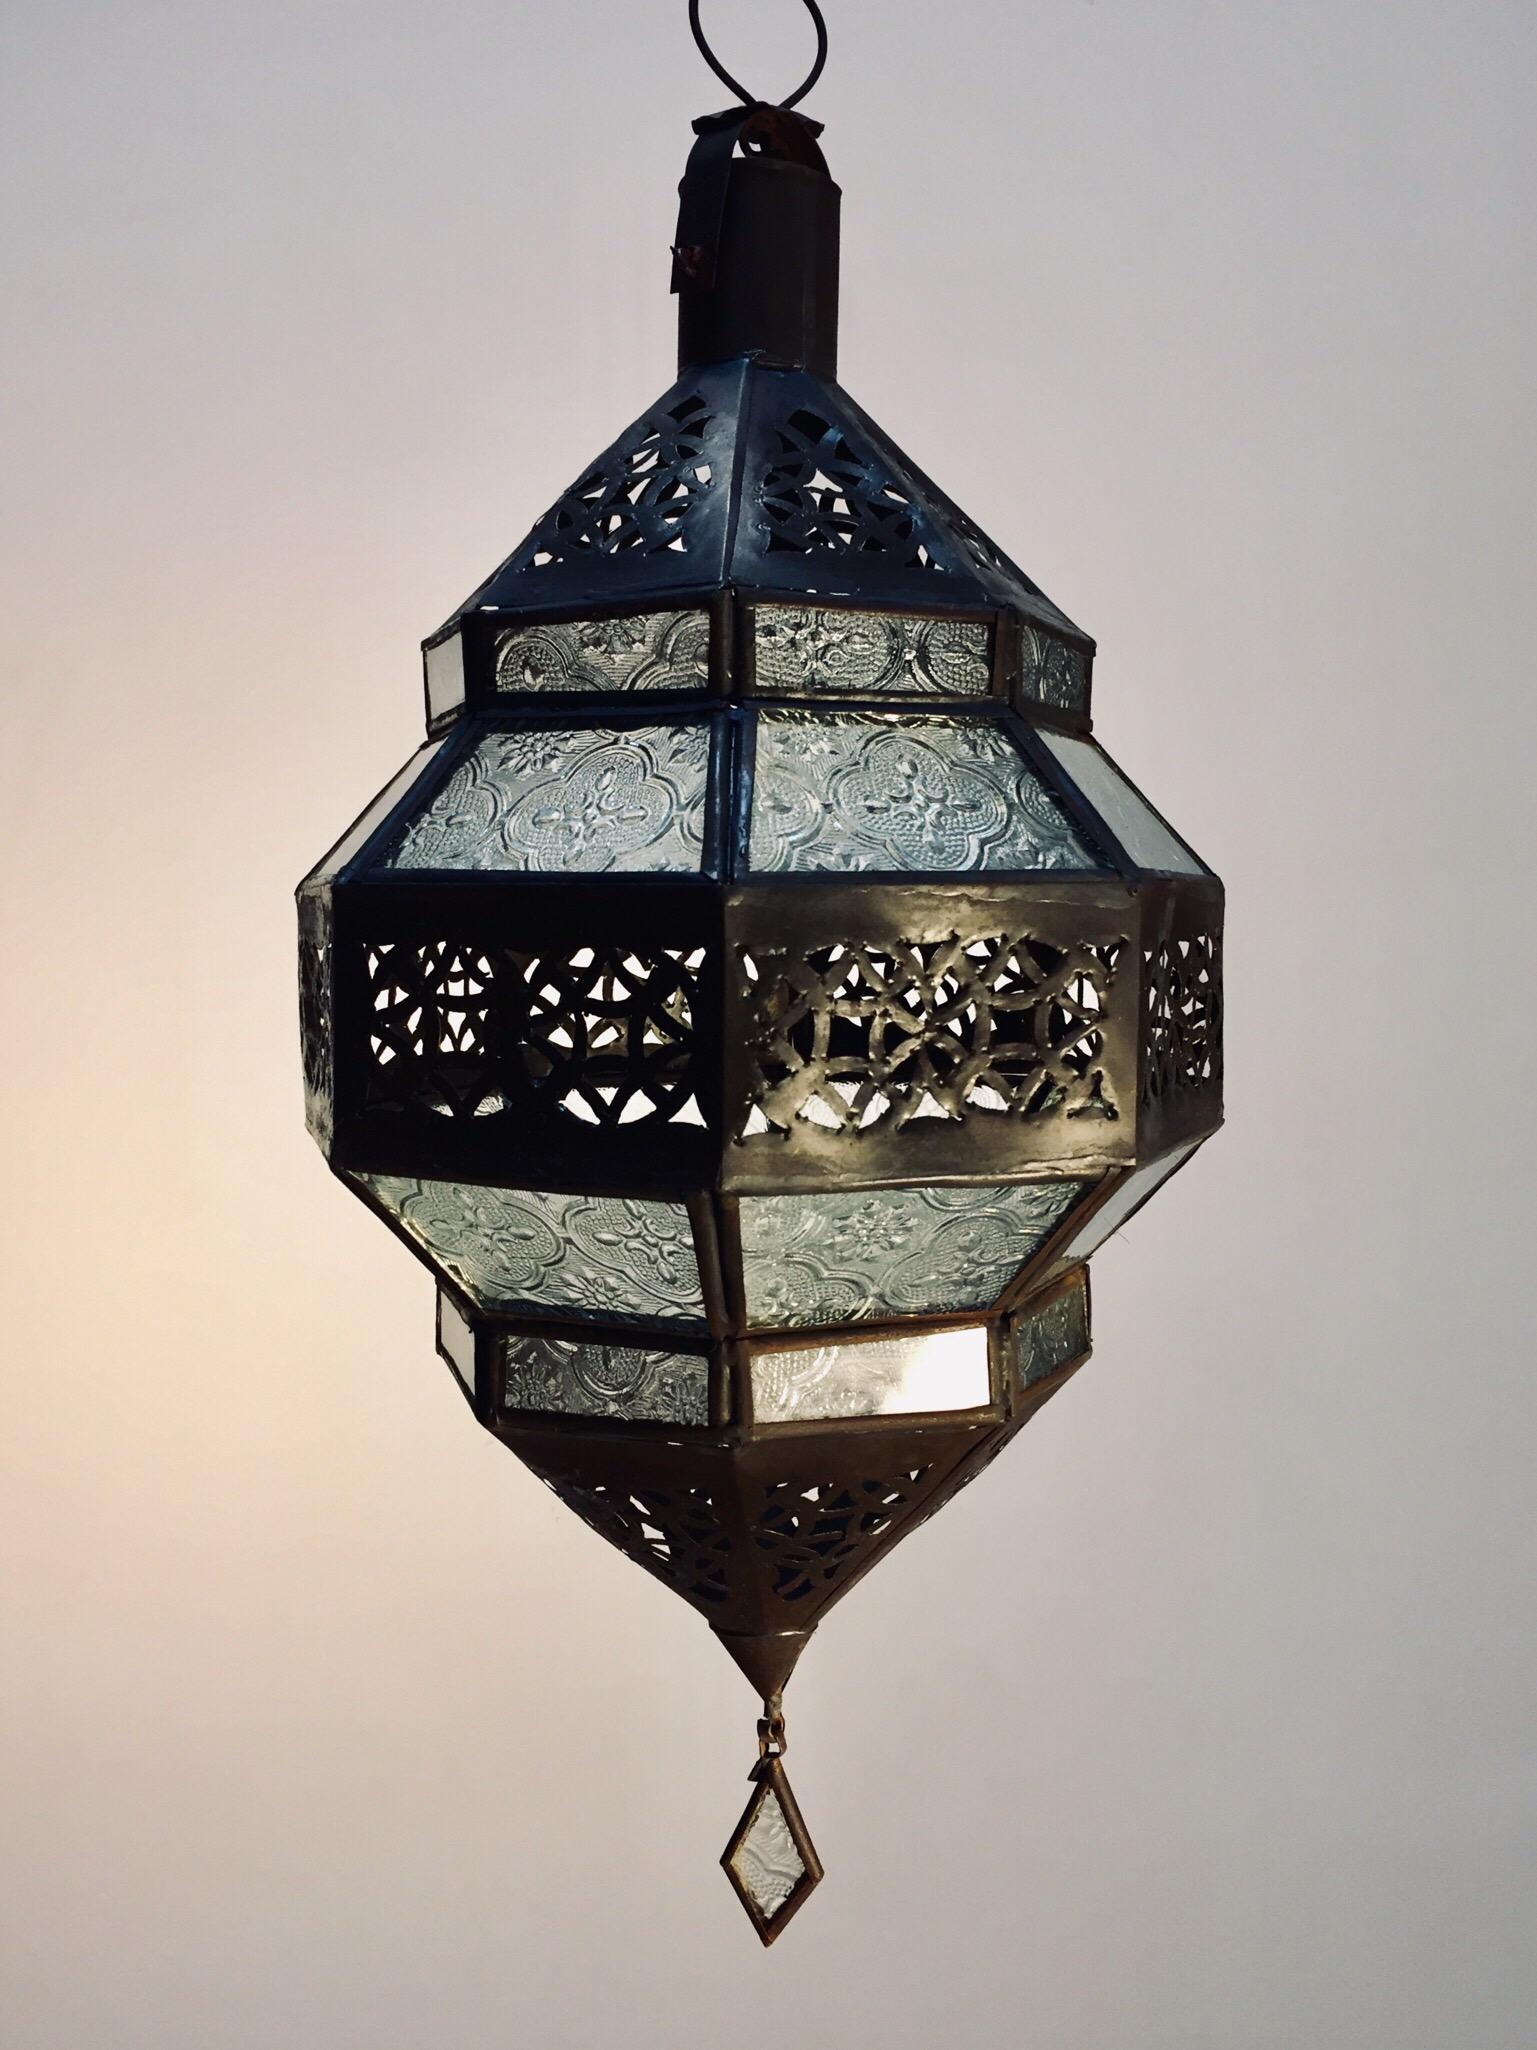 Moroccan metal and clear frosted glass lantern.
Moroccan lantern in octagonal shape with rust color metal finish and clear glass.
The top and bottom metal hand-cut in openwork Moorish design.
This Moroccan lantern  when lit will cast light on the